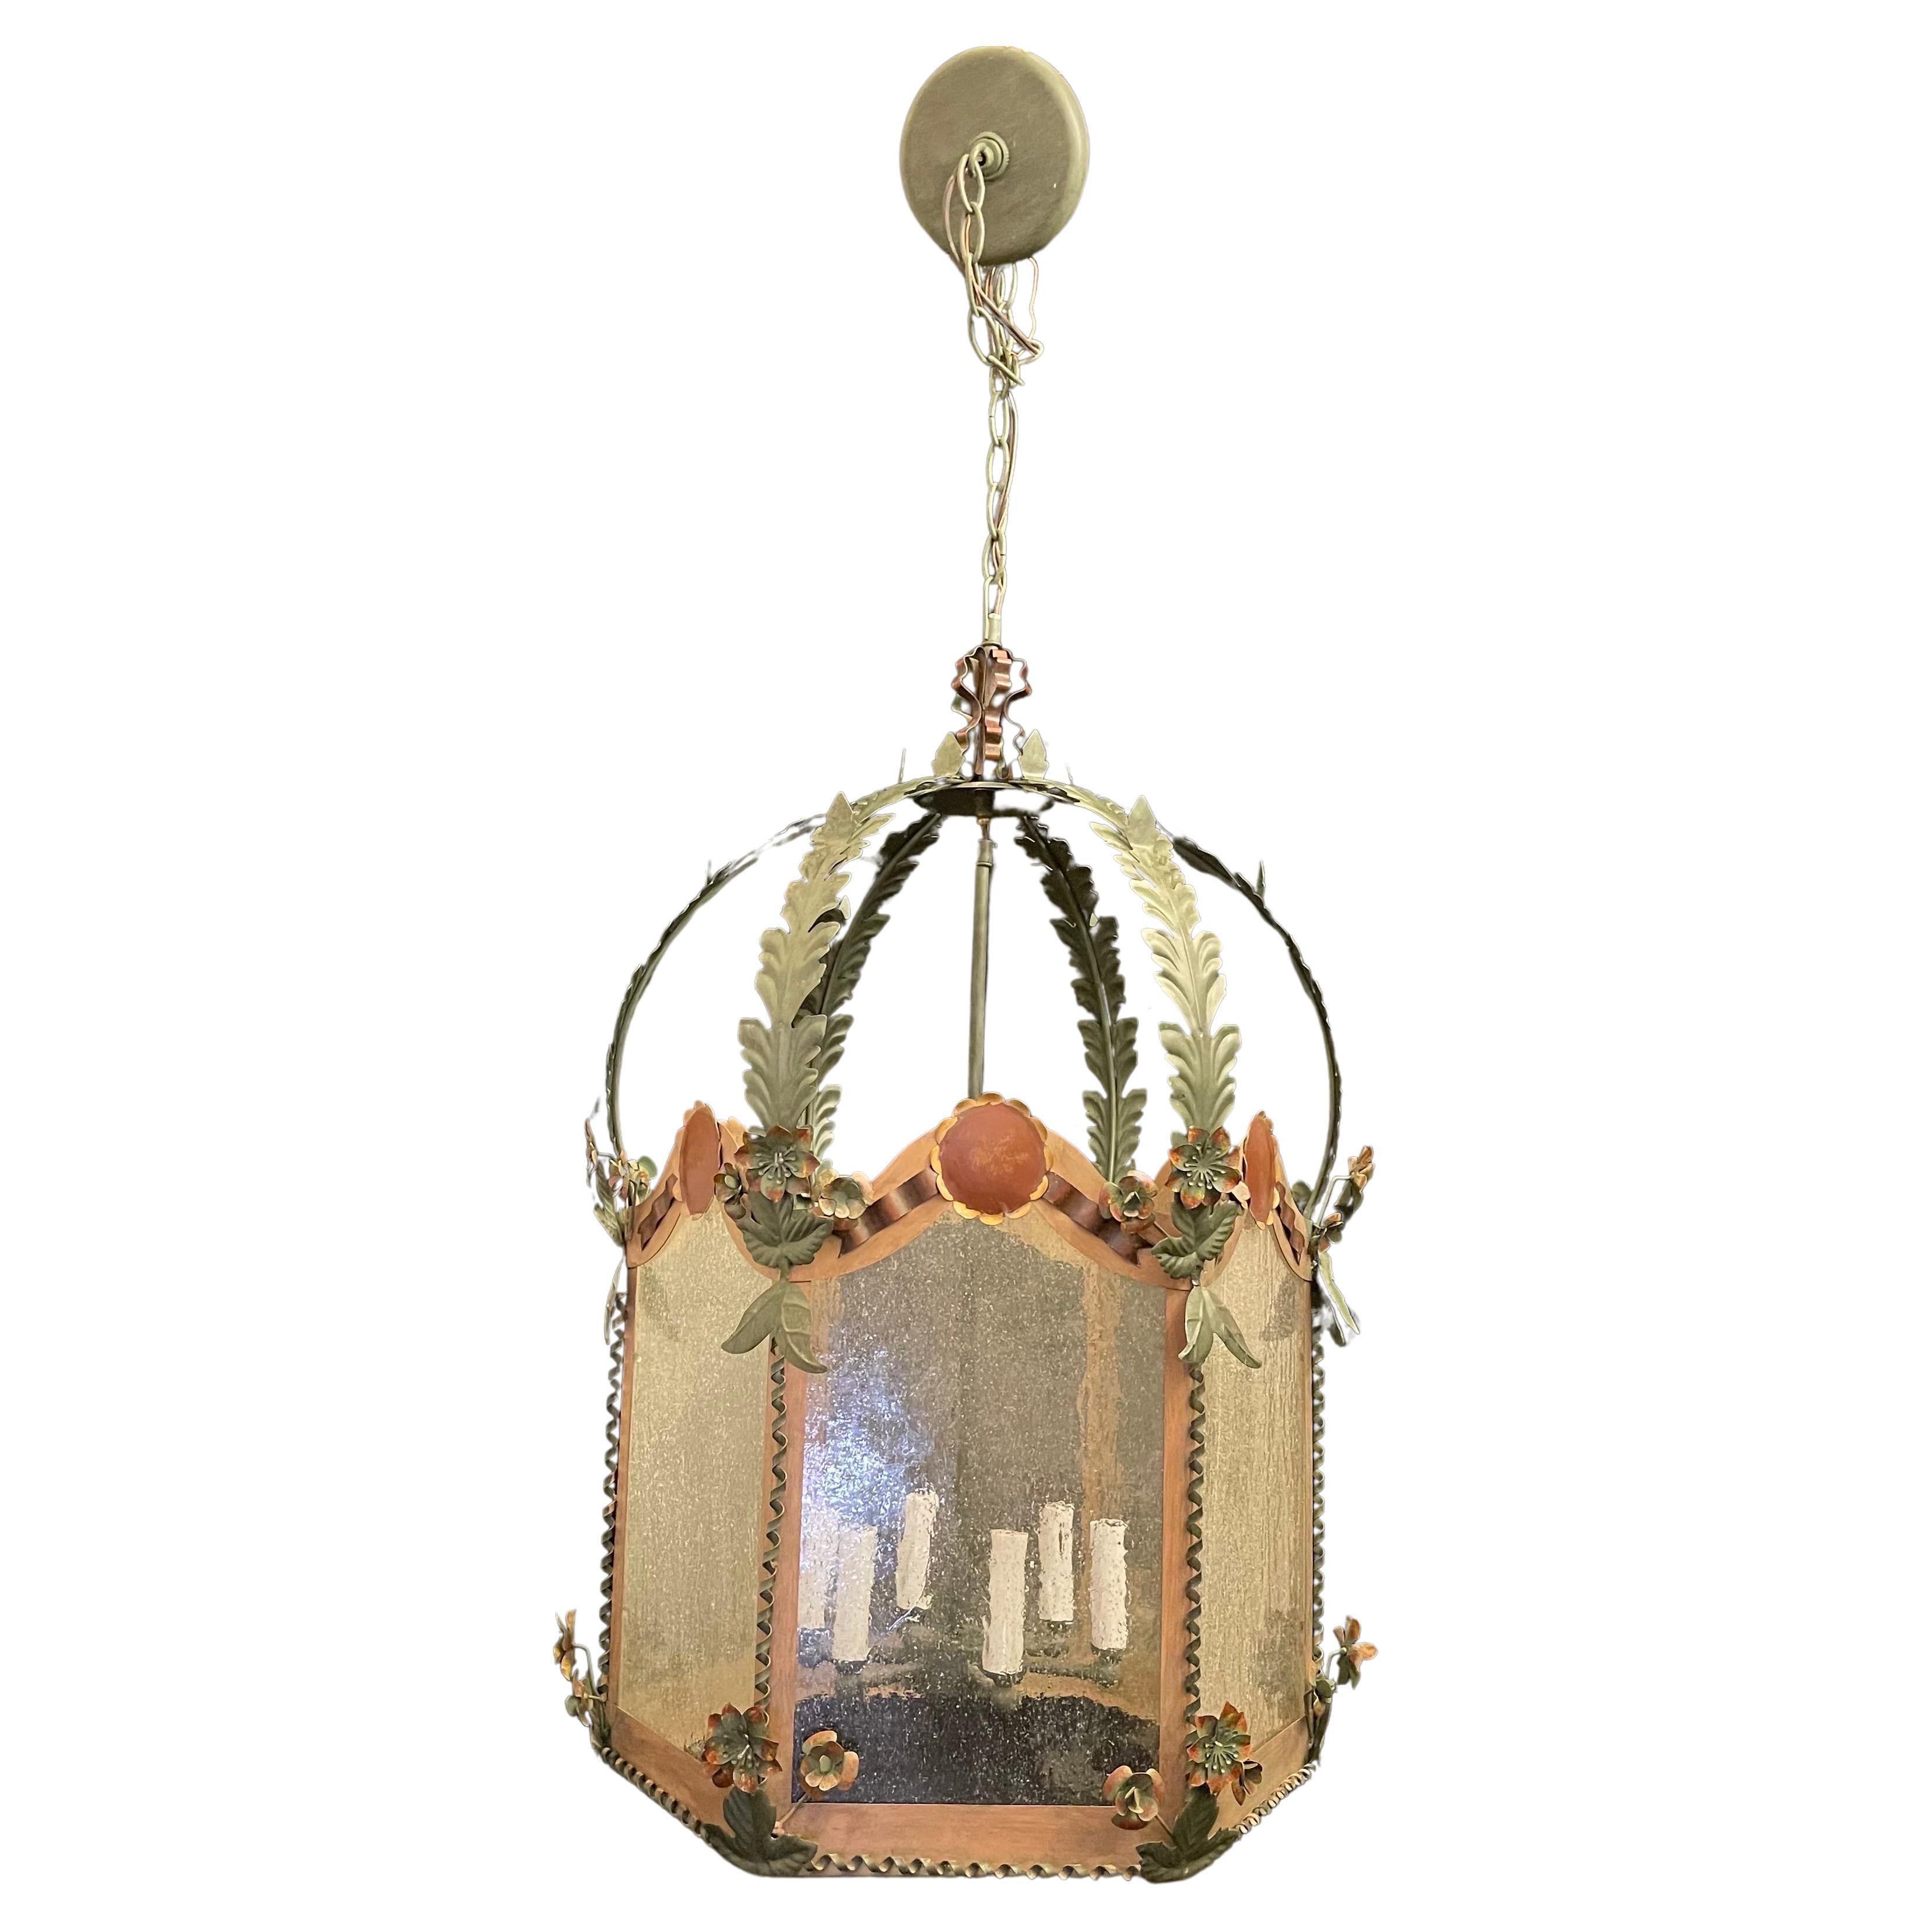 Wonderful Large Italian Painted Tole Glass Lantern Fixture Ribbons Bows Flowers For Sale